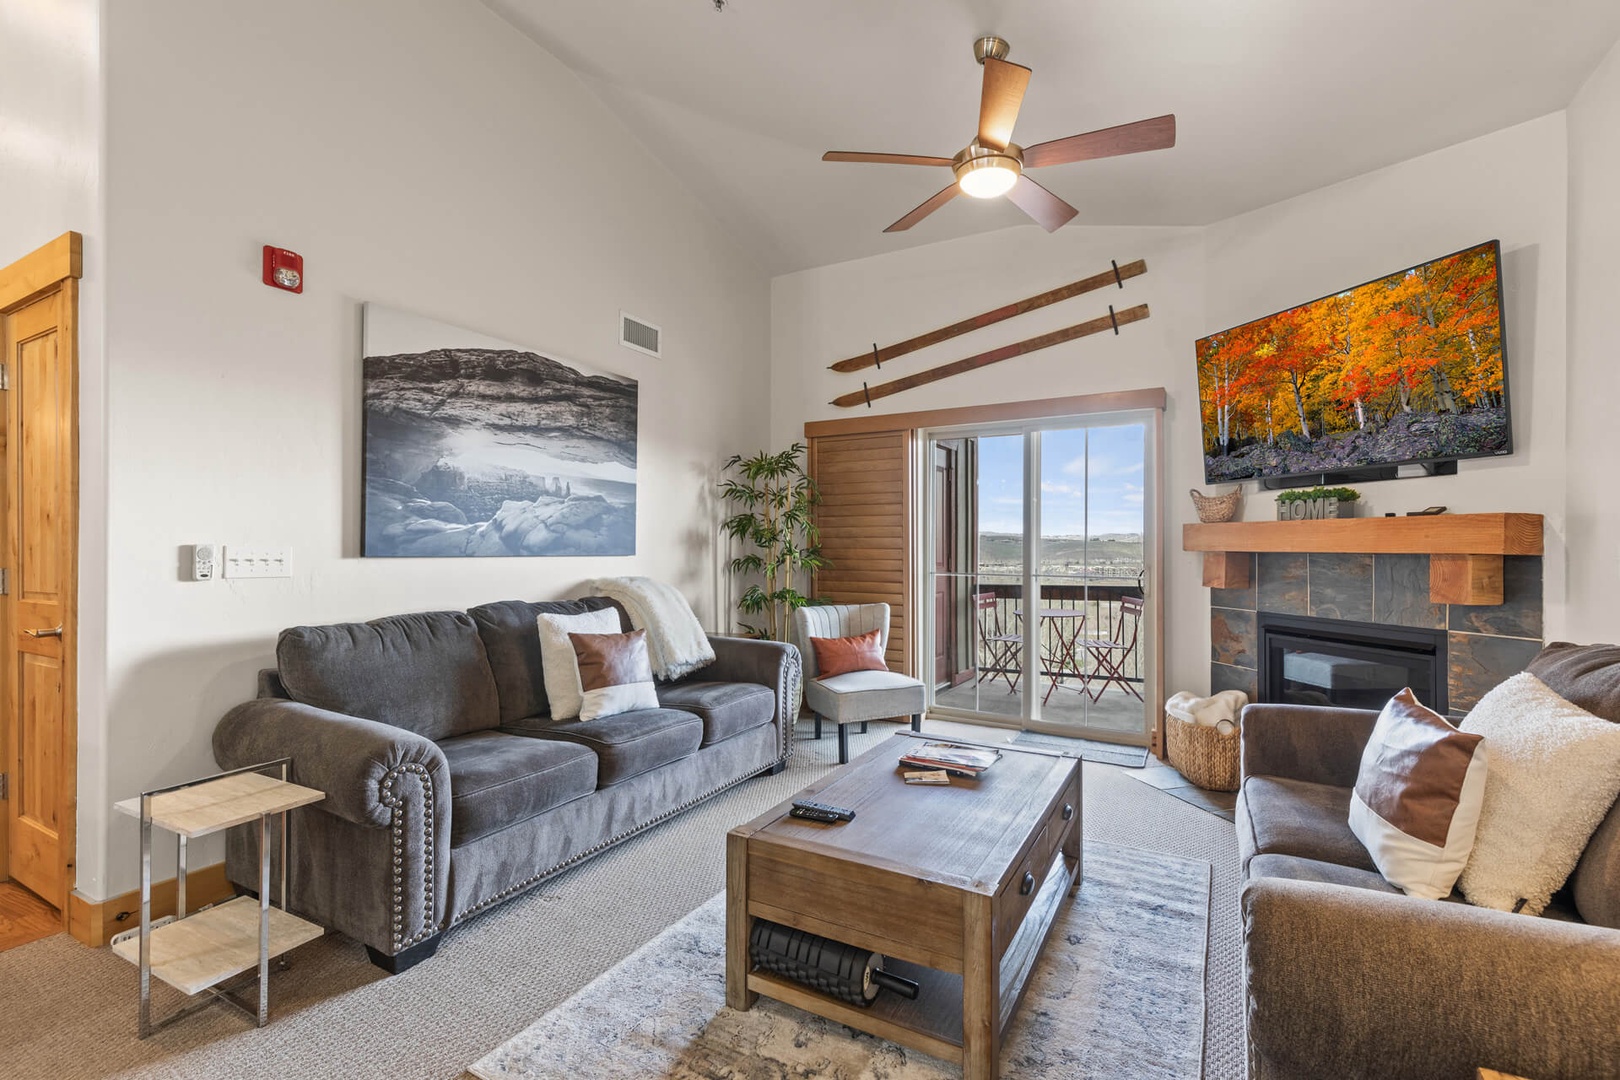 Bear Hollow Lodges 1313:  Take a seat on the plush leather sofa or loveseat, and enjoy a movie or your favorite TV show on the large HDTV.   From the great room, a sliding glass door frames the mountain views and allows access to the private patio area.